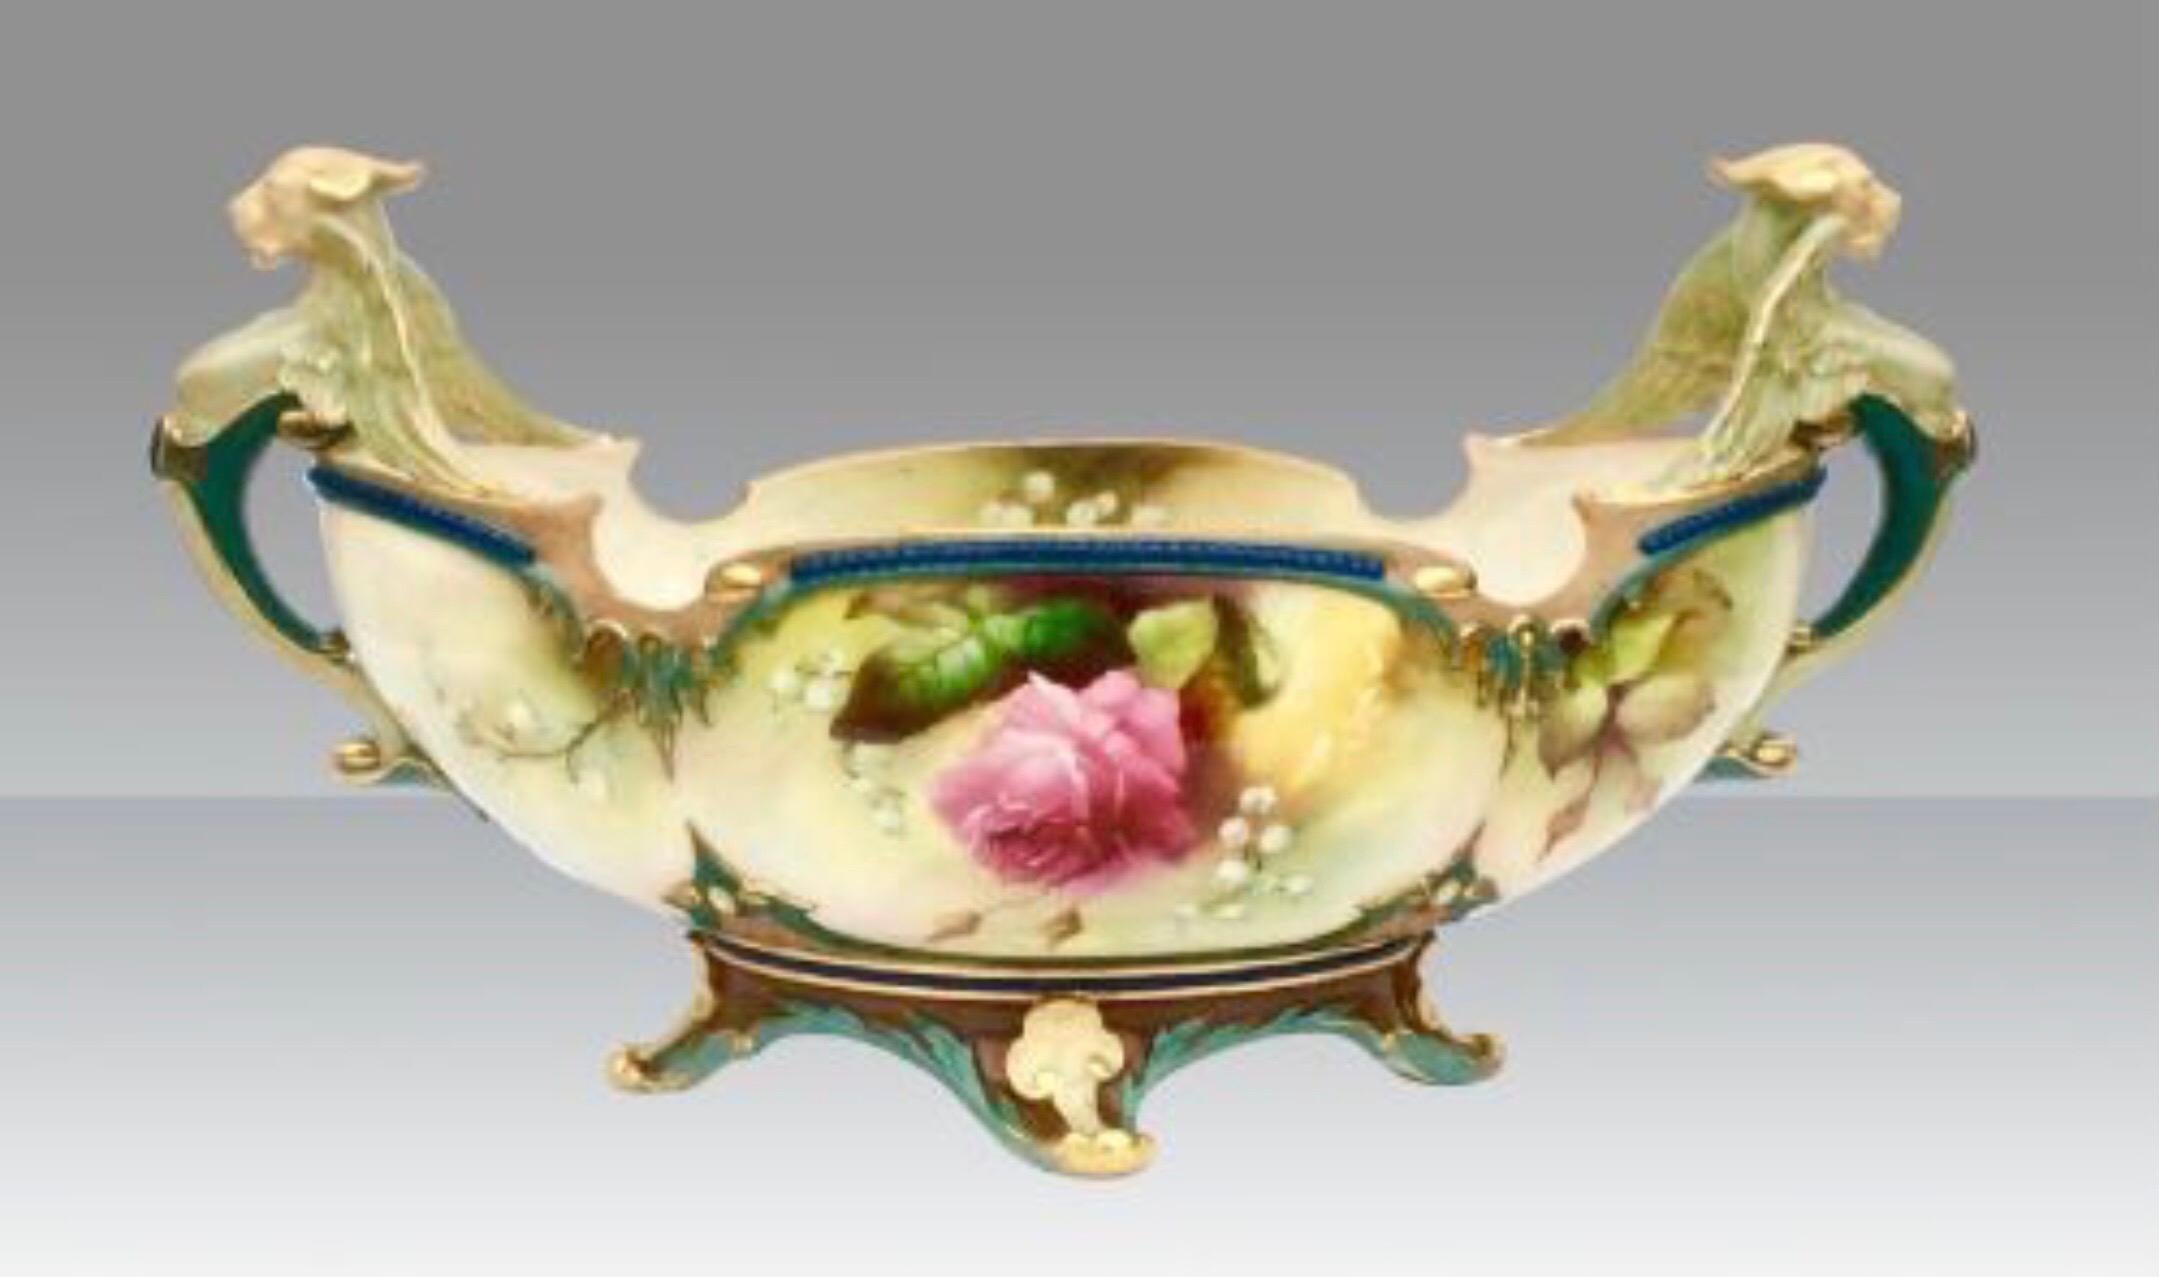 Magnificent large antique Hadley Royal Worcester boat shaped centrepiece vase with anthropomorphic handles beautifully hand painted with roses and butterflies,superbly gilted and signed By W Lewis,
Measures: 14ins x 7.5ins x 6ins deep
Dated 1907.